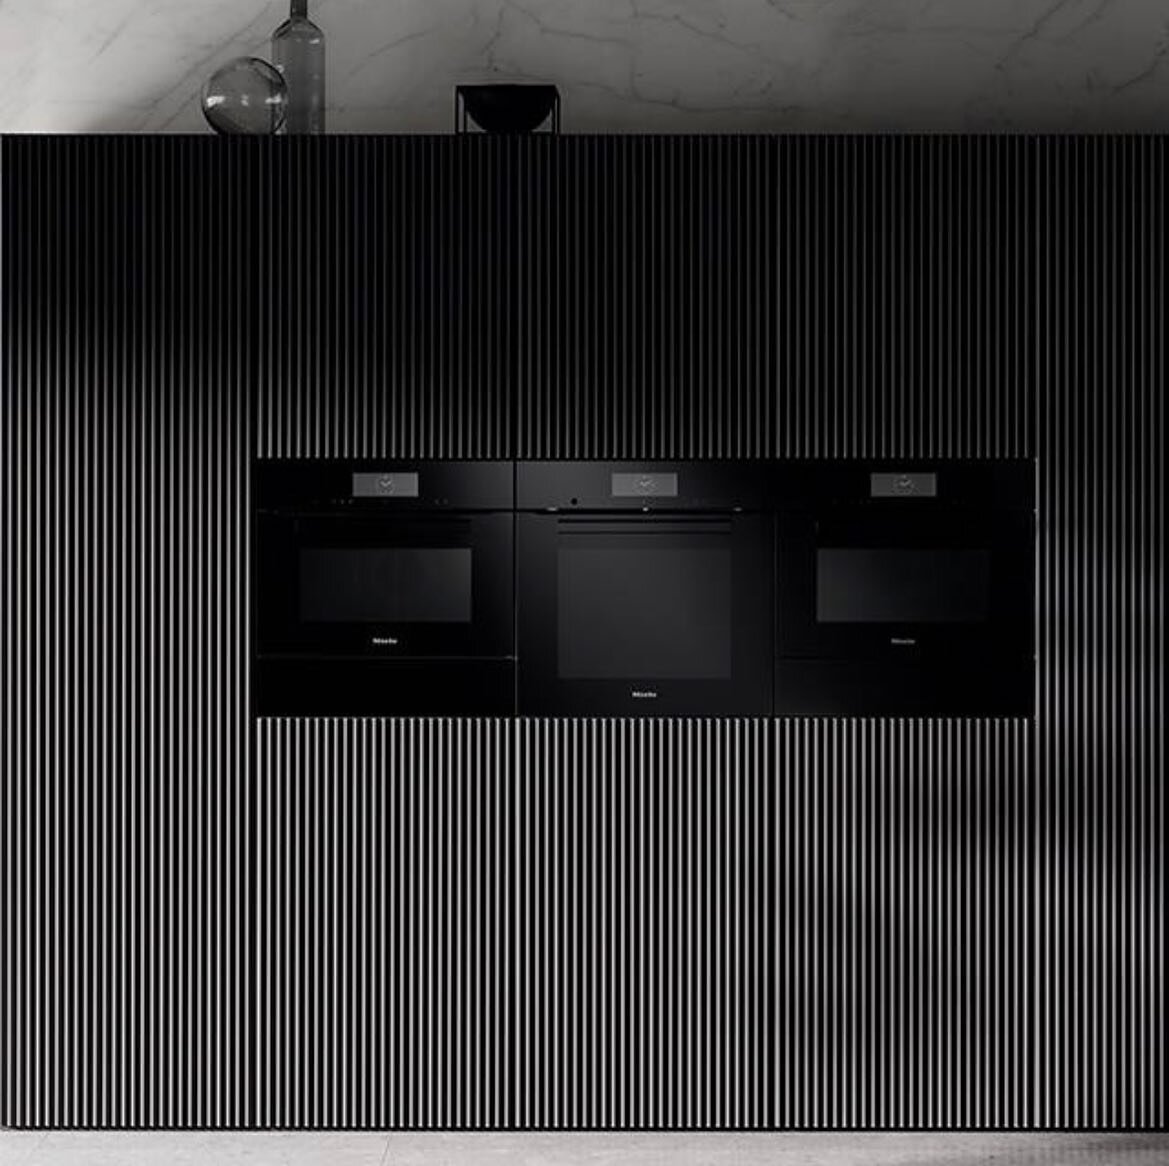 VitroLine design in obsidian black - Miele&rsquo;s new Generation 7000 kitchen appliances have been designed to be smoothly combined both vertically or horizontally.